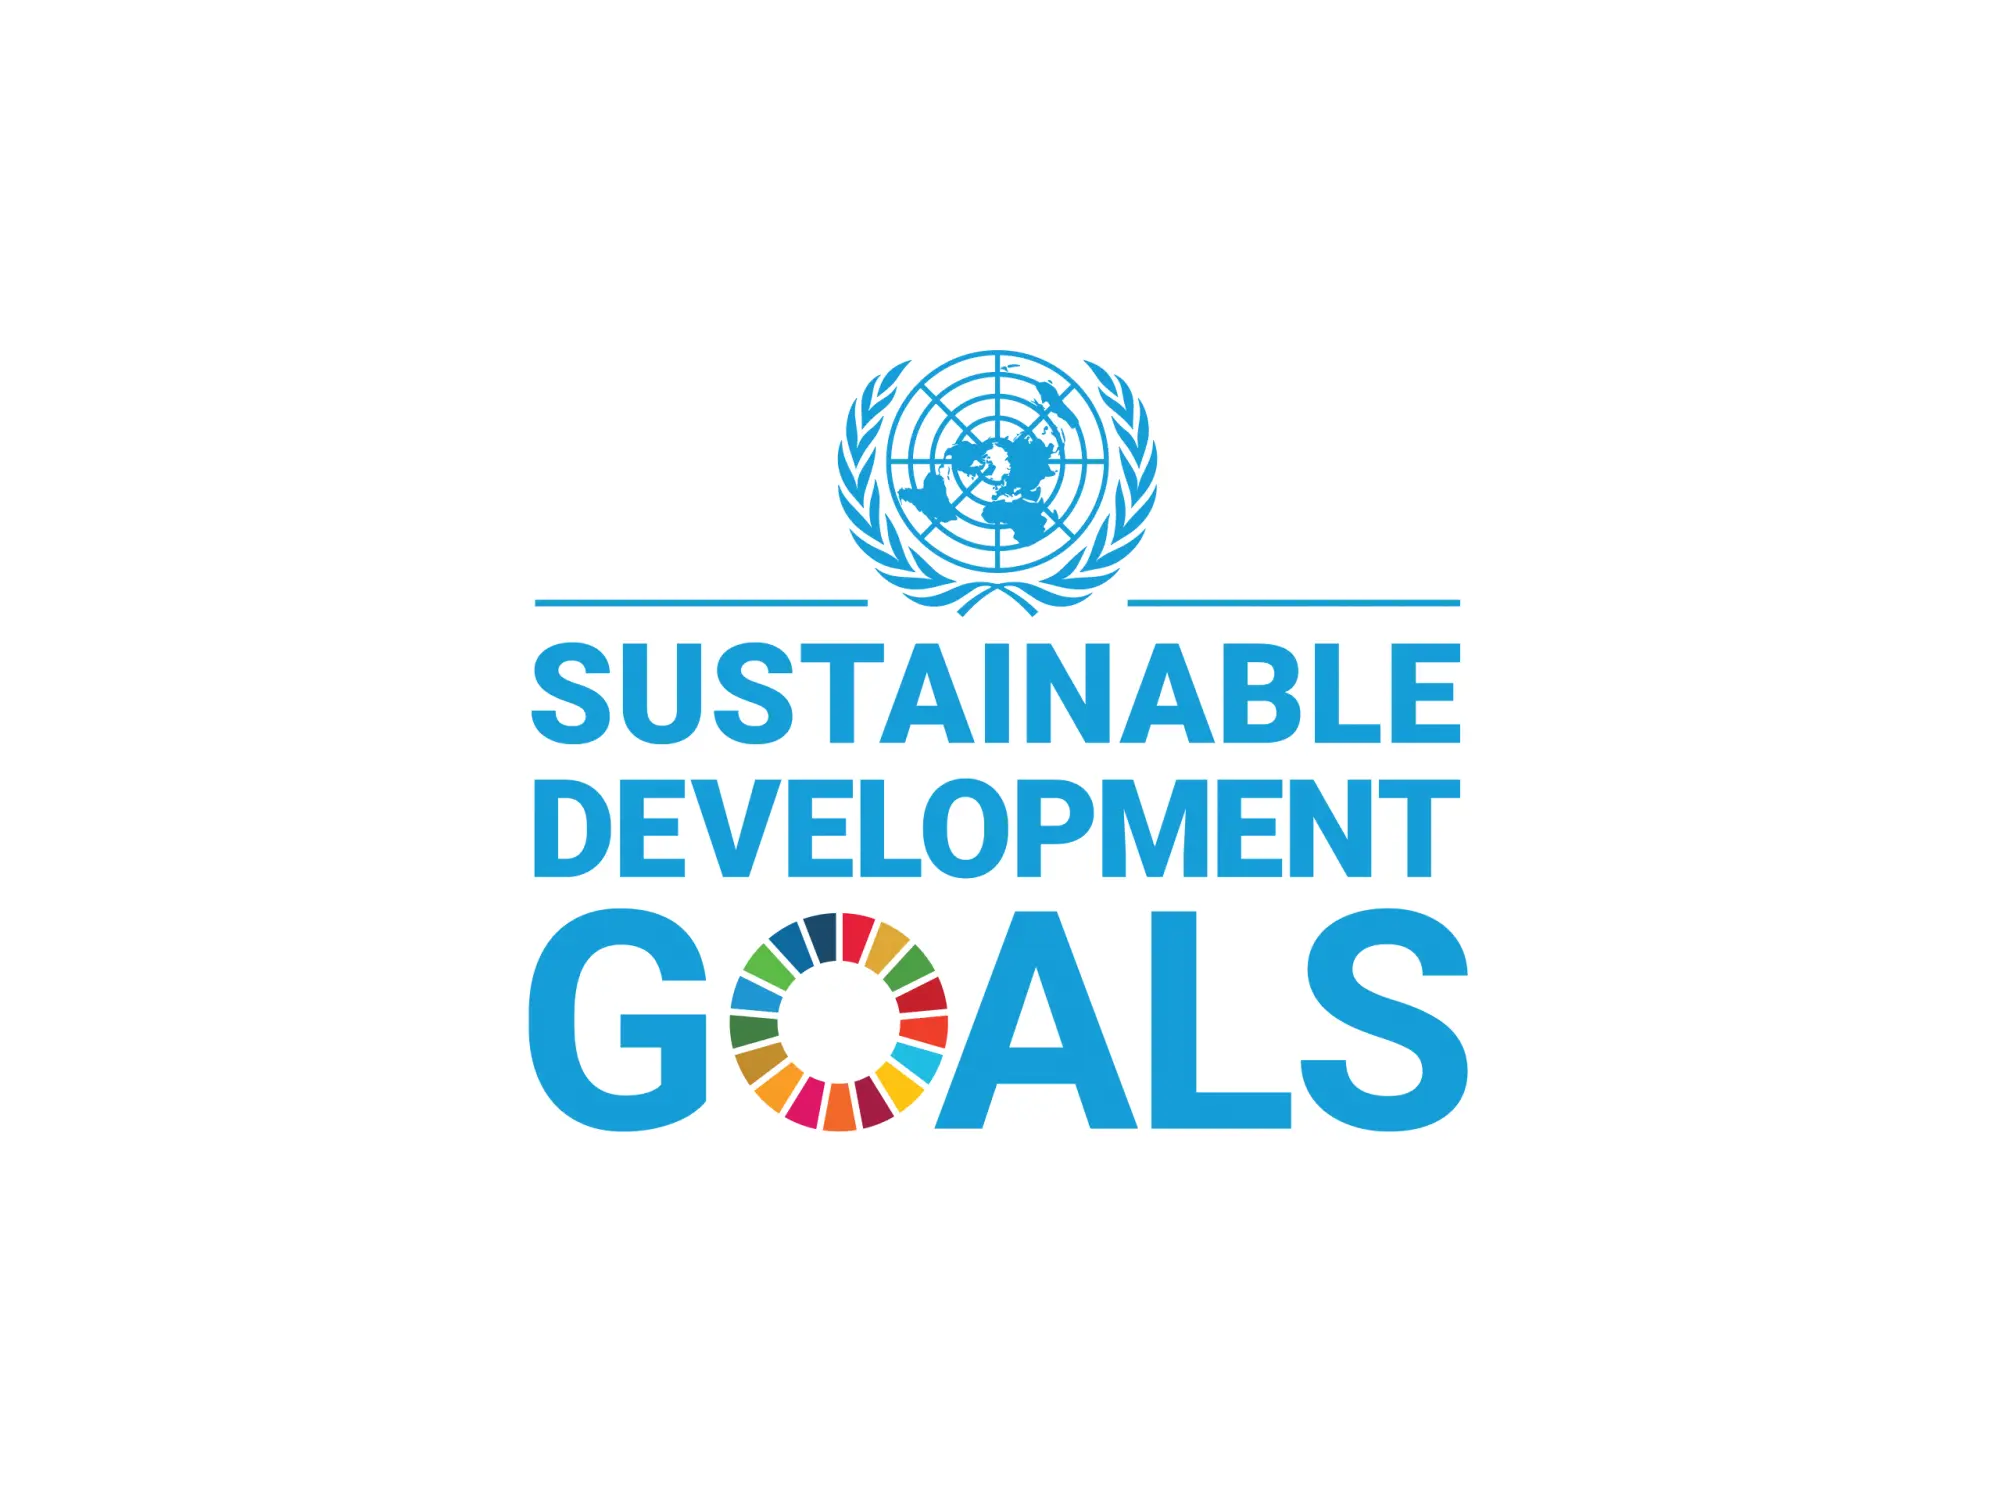 Sustainable Development Goals from the United Nations.